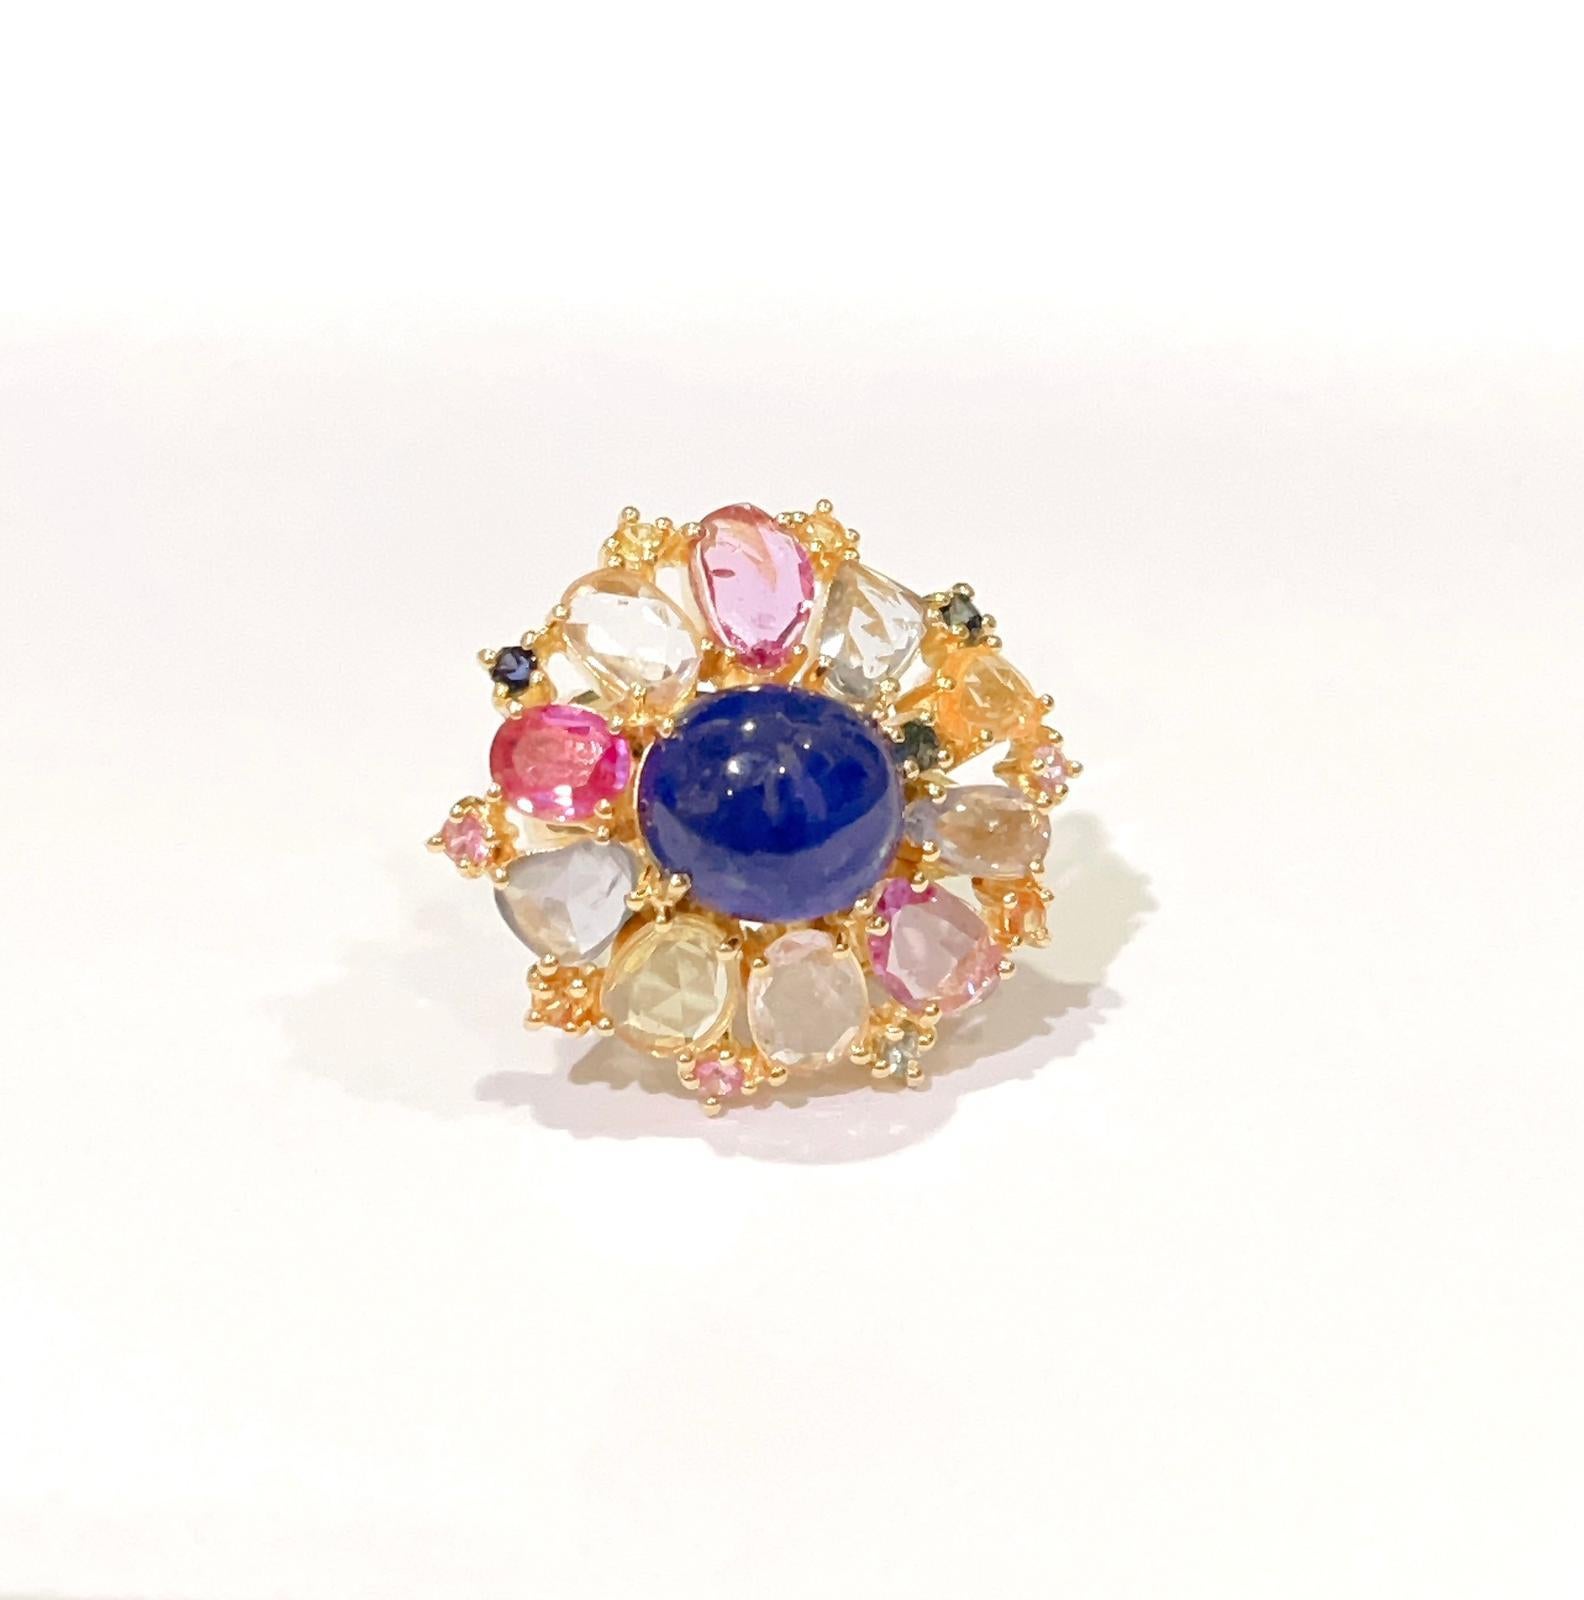 “Capri” Blue Sapphire & Rose Cut Cocktail Ring Set in 22k Gold & Silver In New Condition For Sale In New York, NY